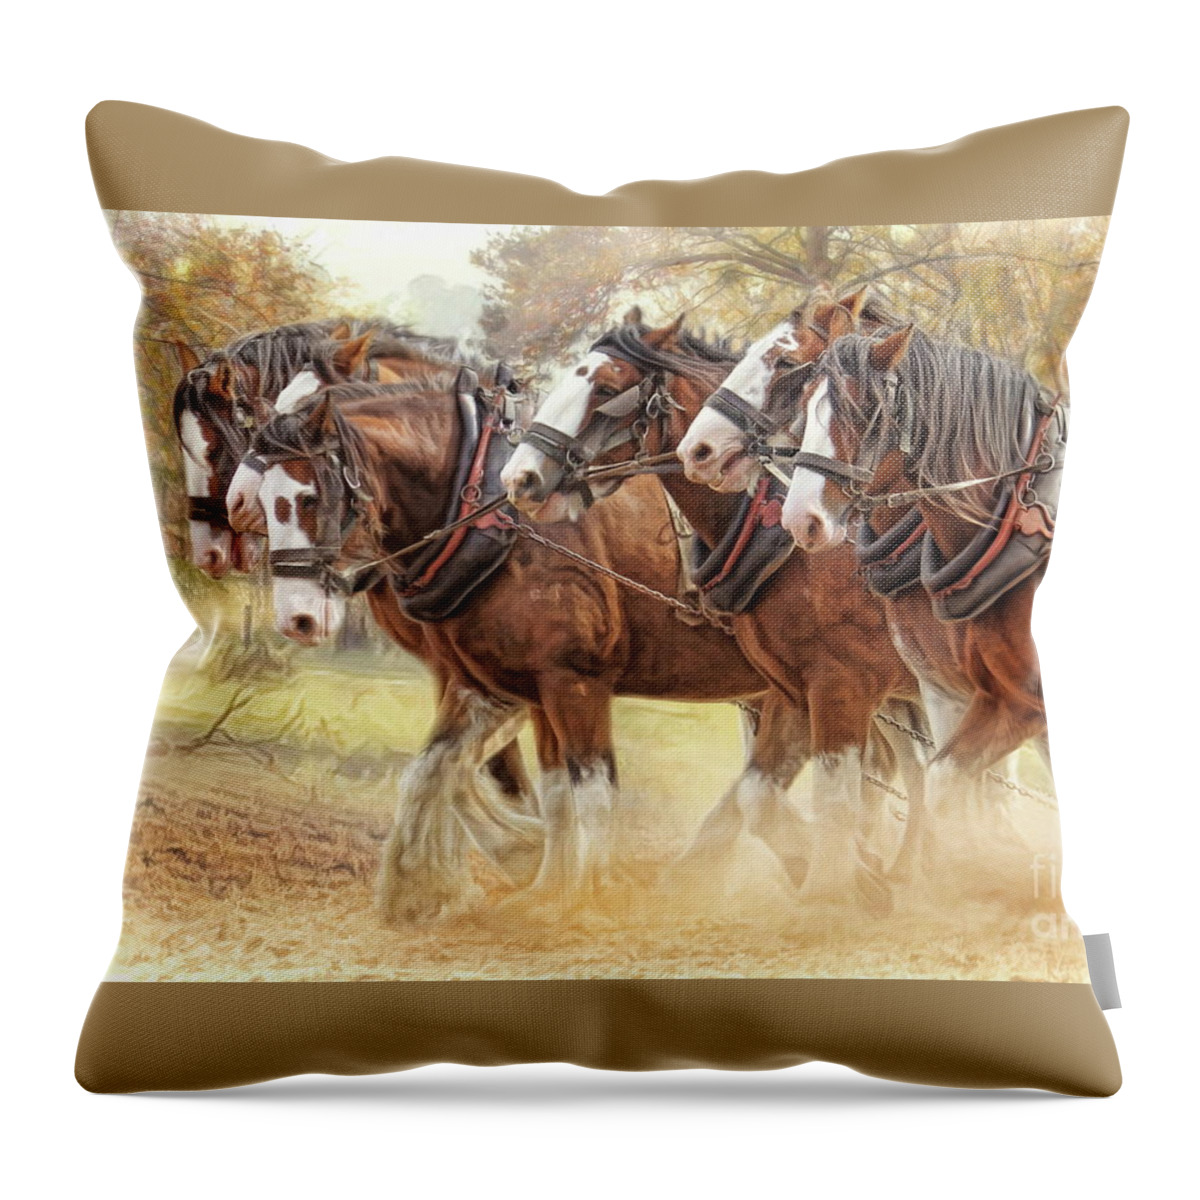 Clydesdale Throw Pillow featuring the digital art Autumn Harrow by Trudi Simmonds